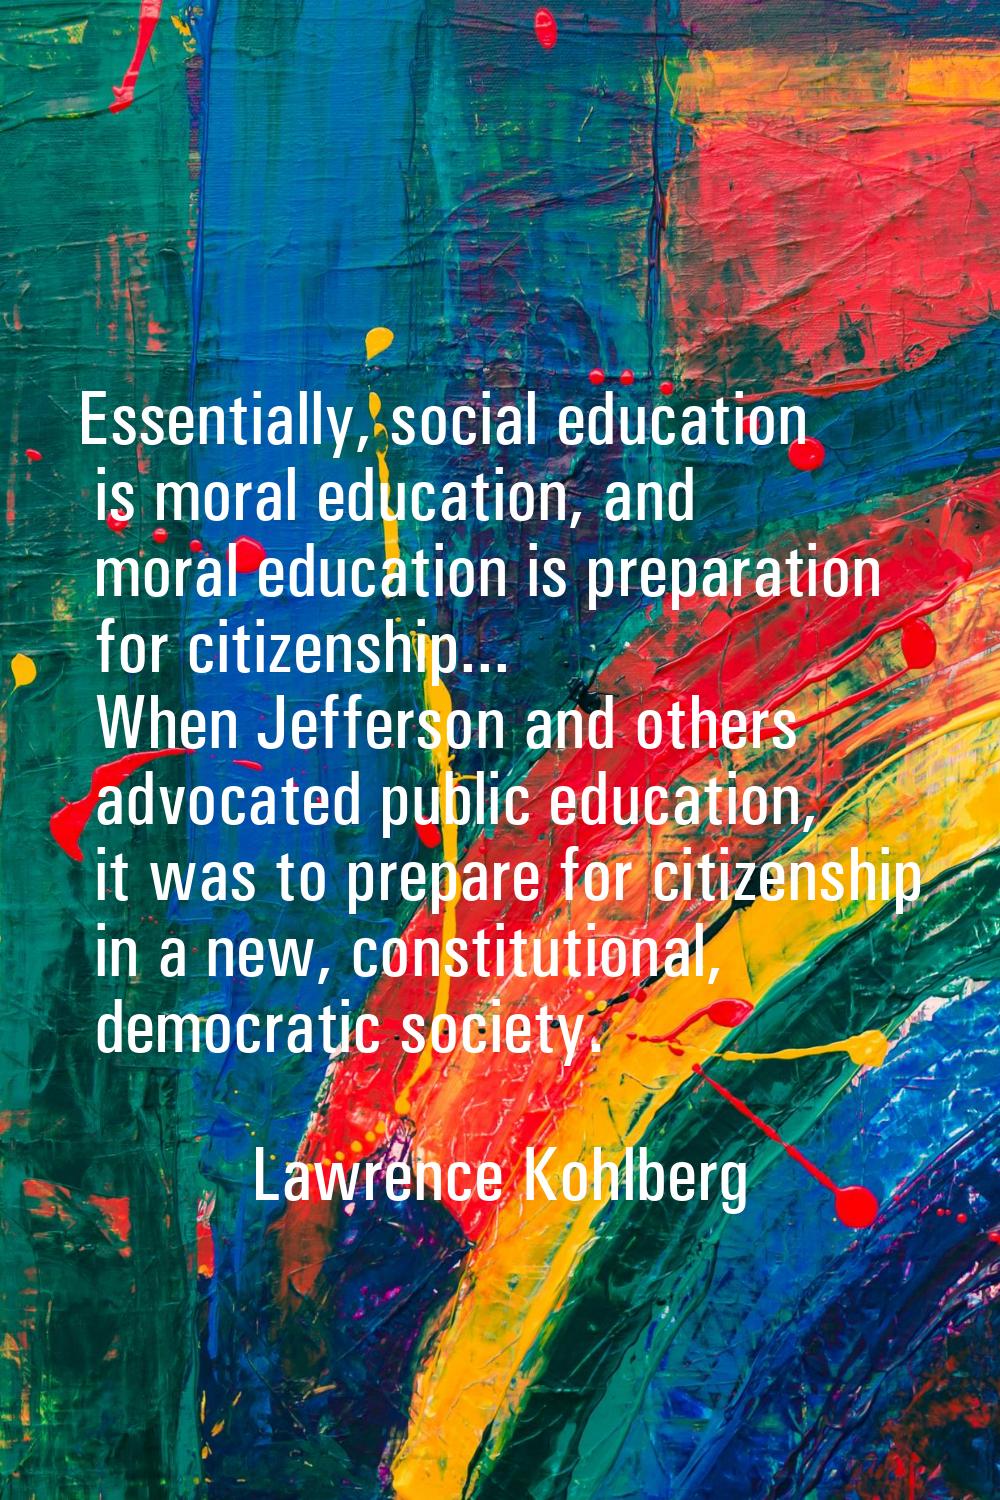 Essentially, social education is moral education, and moral education is preparation for citizenshi